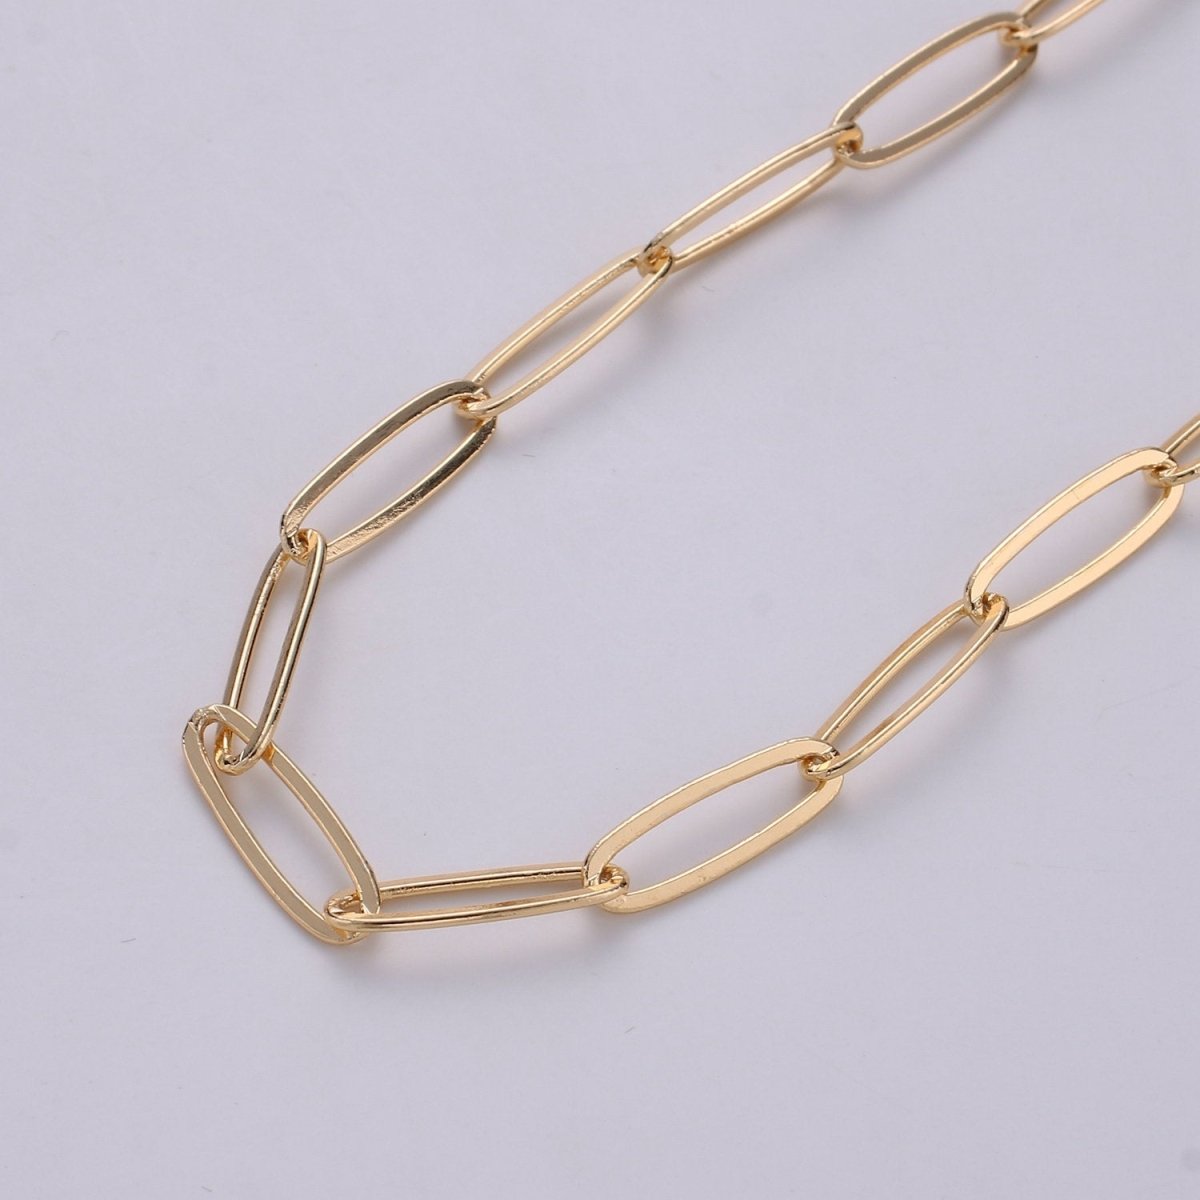 Chunky Paperclip Long Oval Chain Necklace 18x5mm 18k Gold Plated Paper Clip Chain 1 yard Lead, Nickel Free Unfinished Link Chain | ROLL-253 Clearance Pricing - DLUXCA